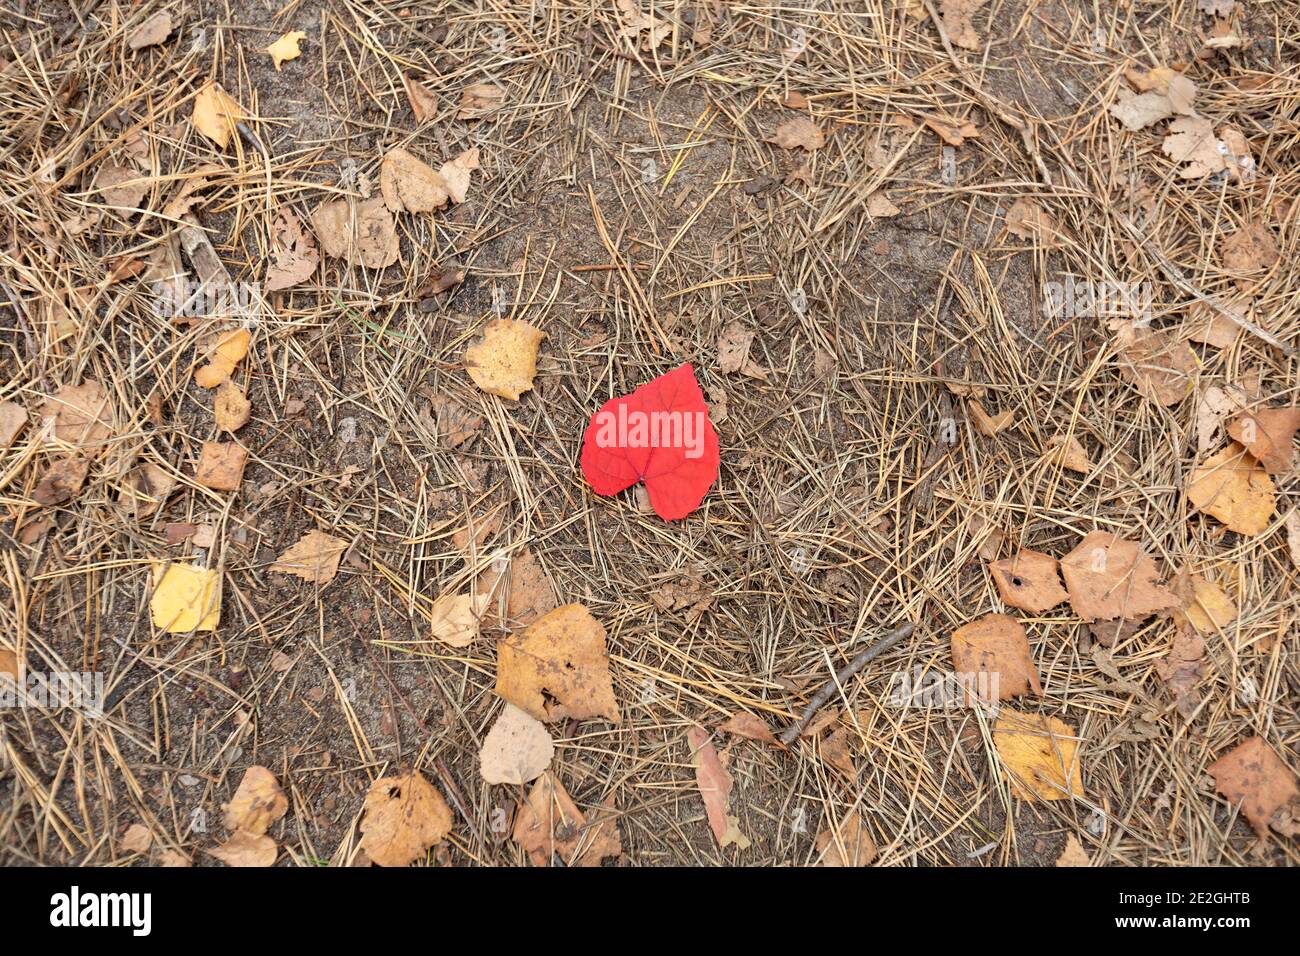 Red heart shape autumn leaf on ground Stock Photo